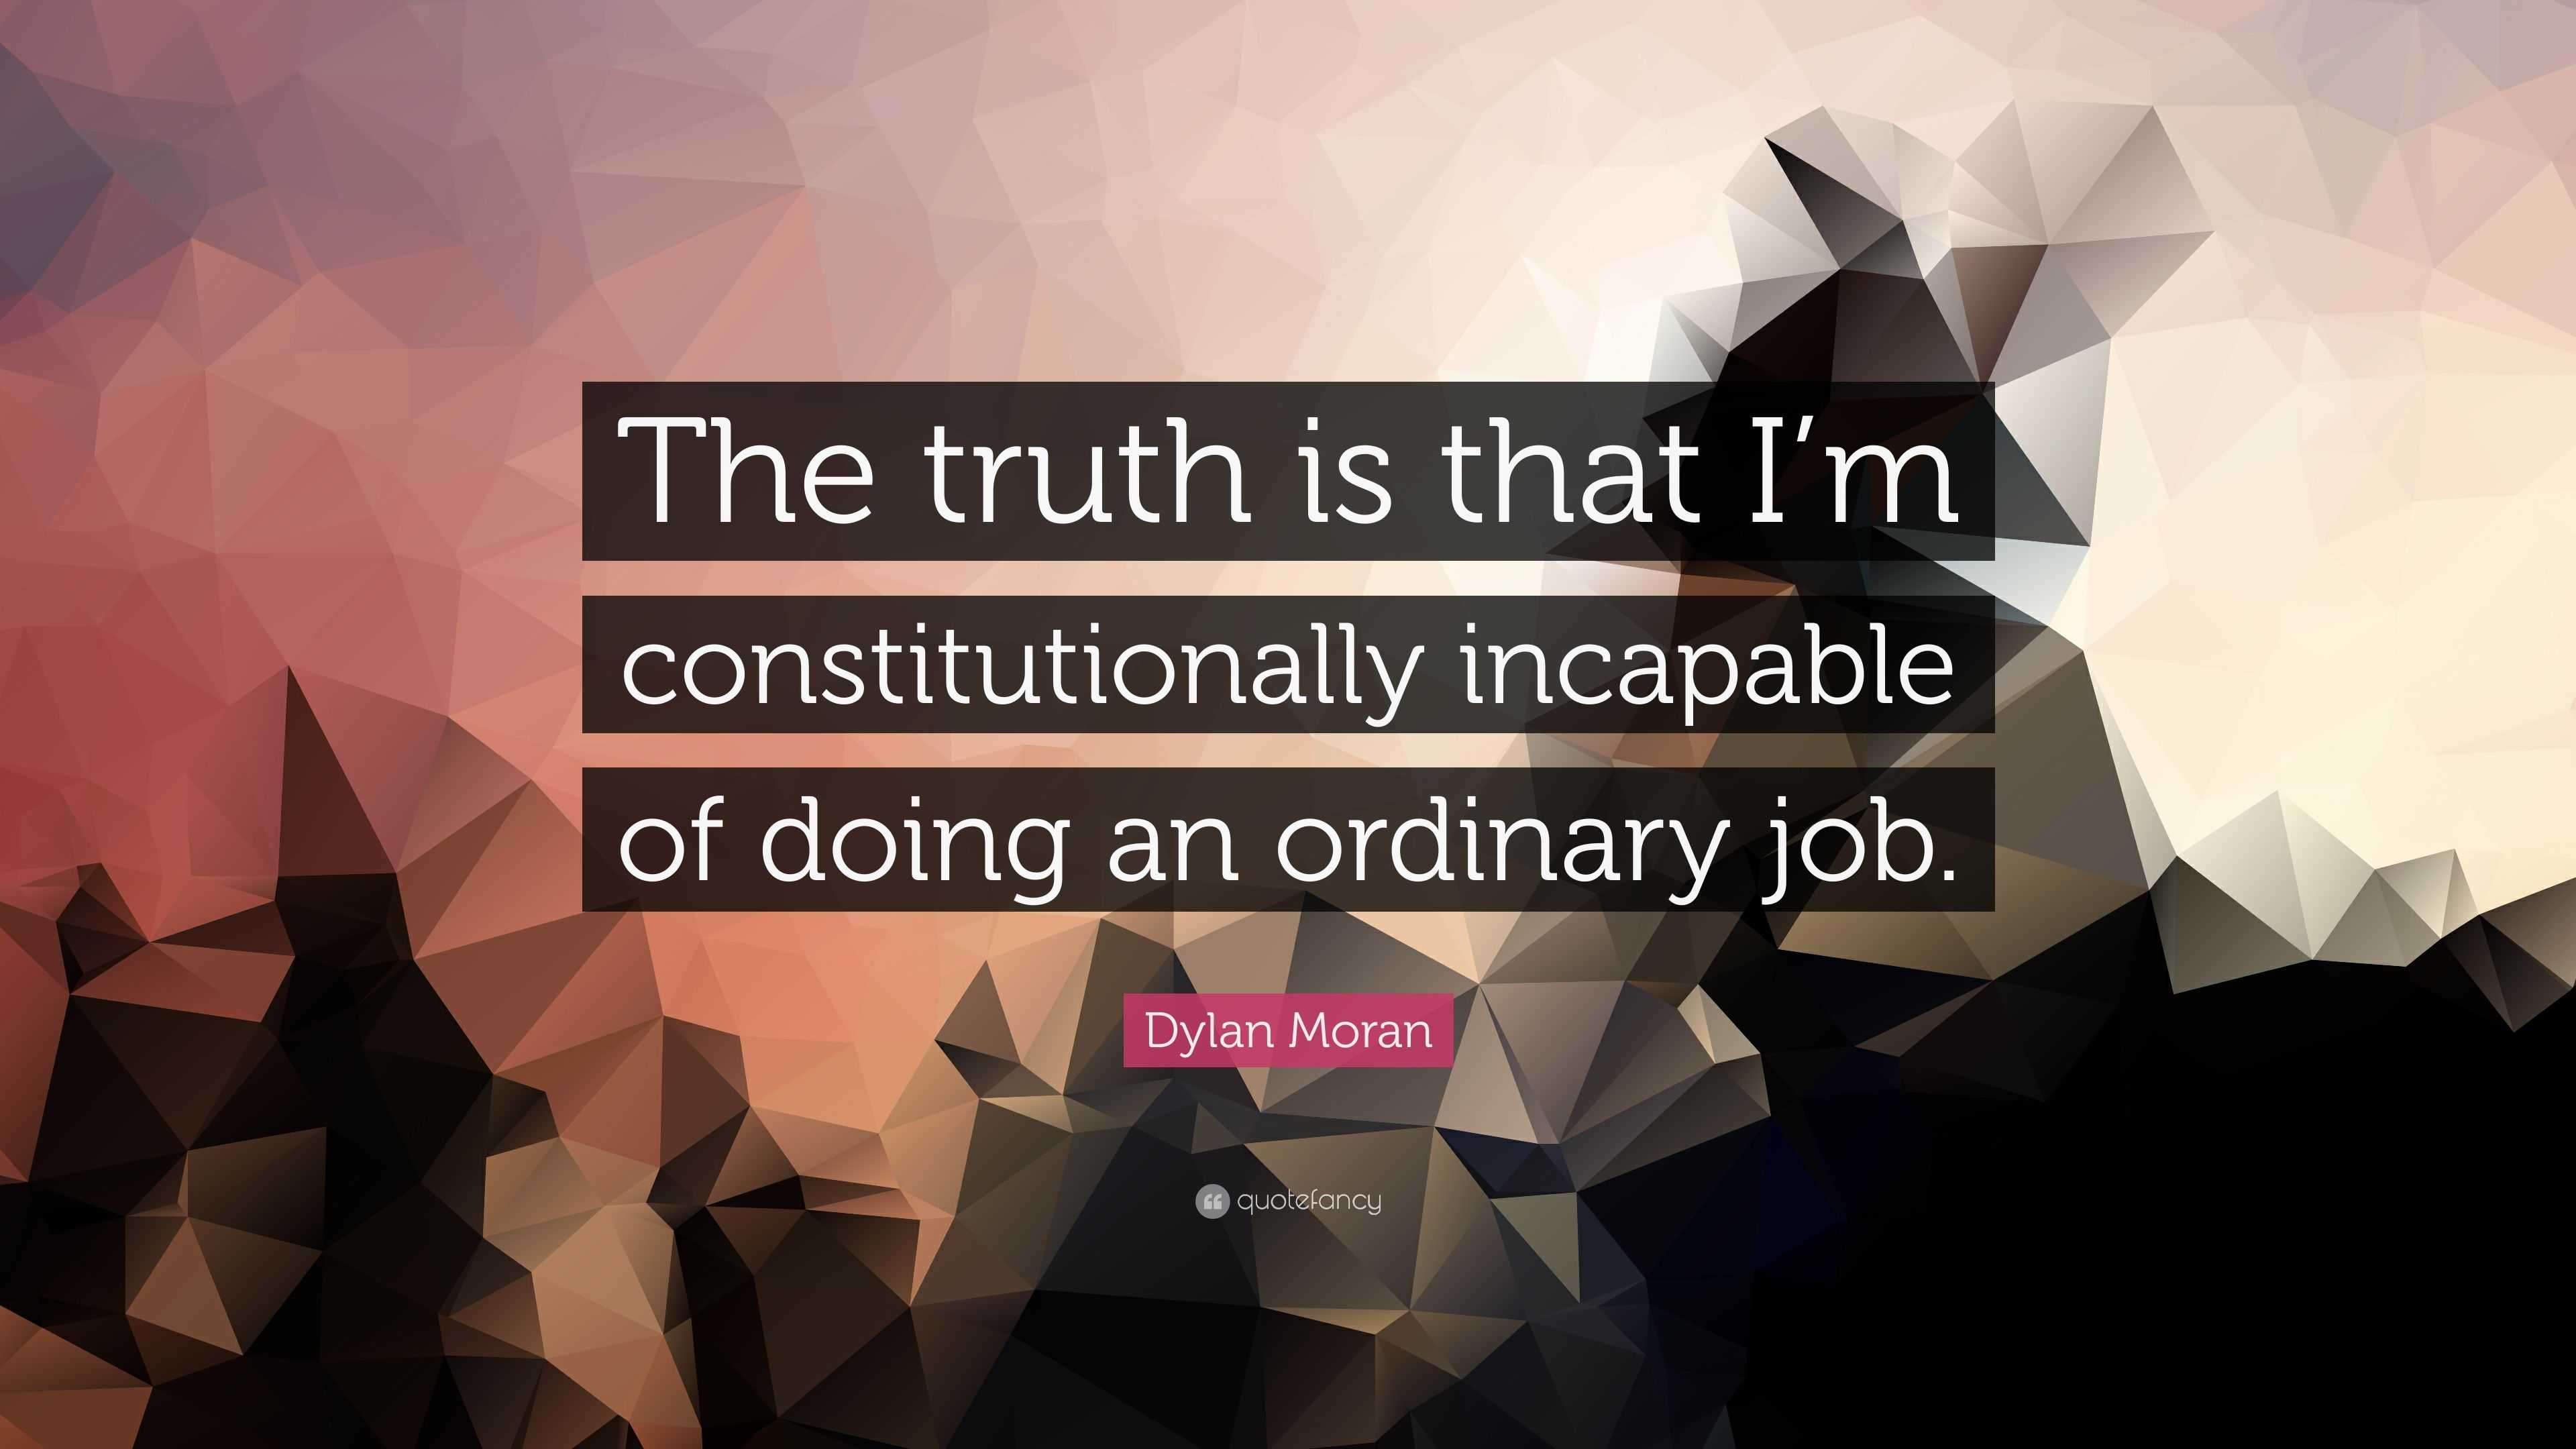 Dylan Moran Quote: “The truth is that I’m constitutionally incapable of